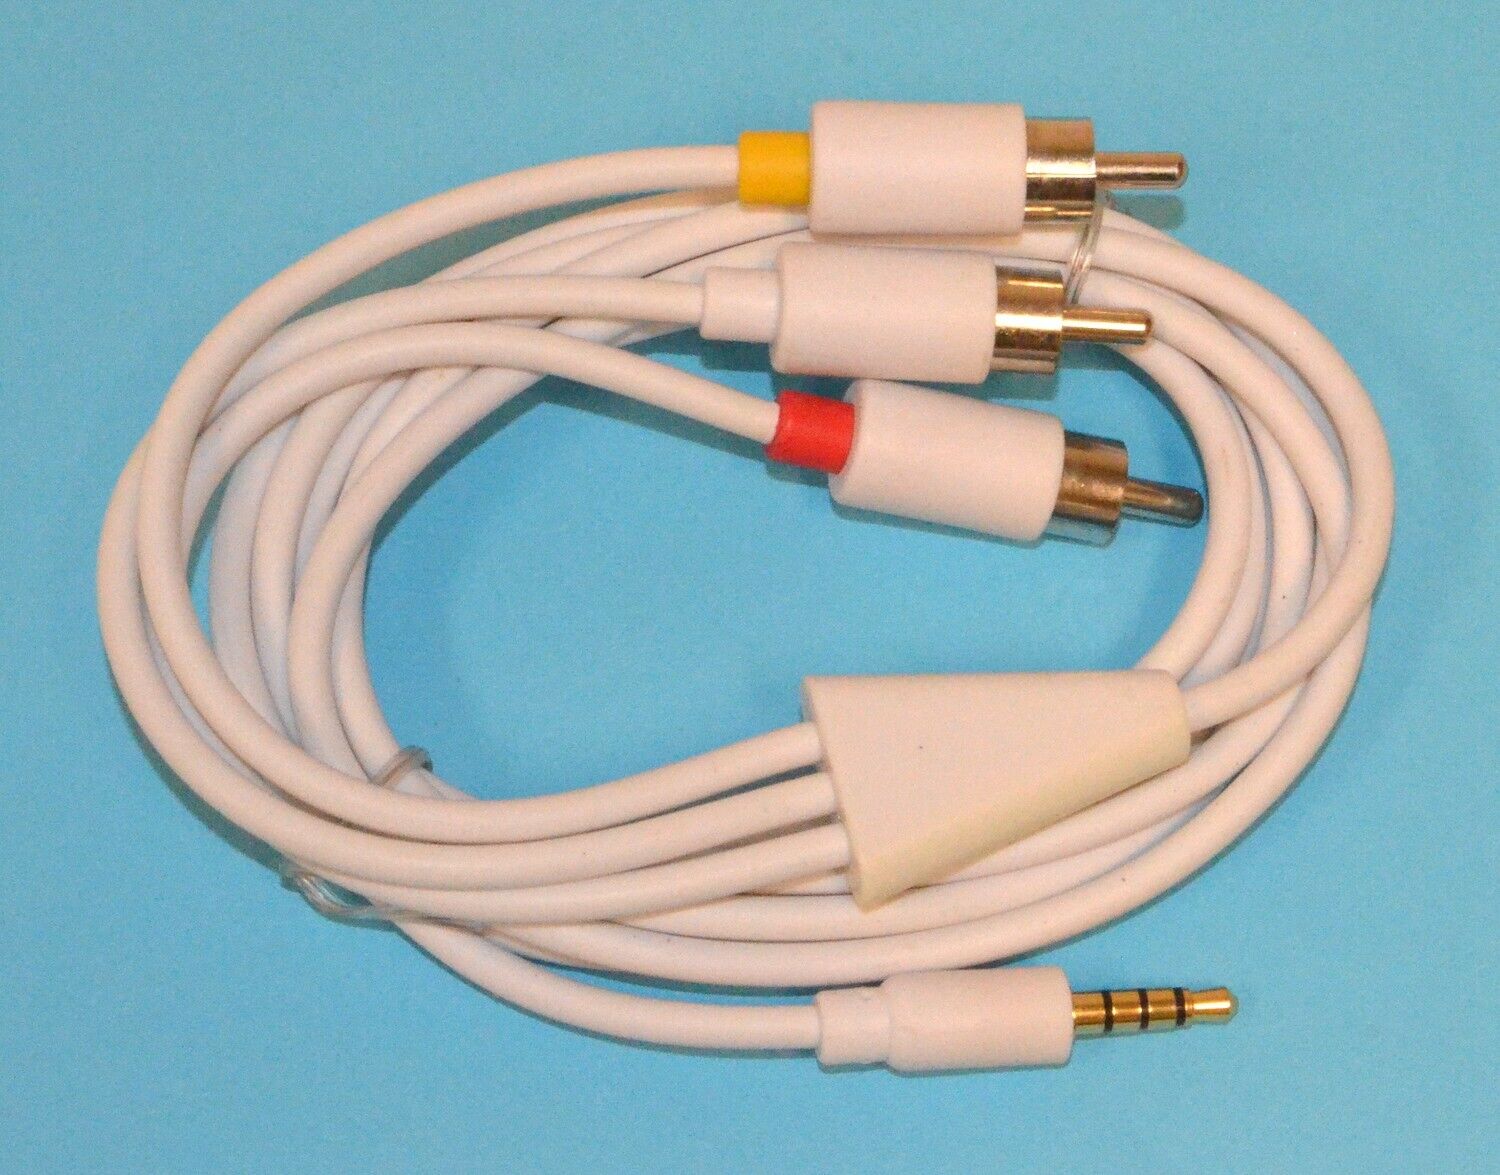 Composite AV Cable to Connect Vintage iPod/iPad/iPhone to TV *New*